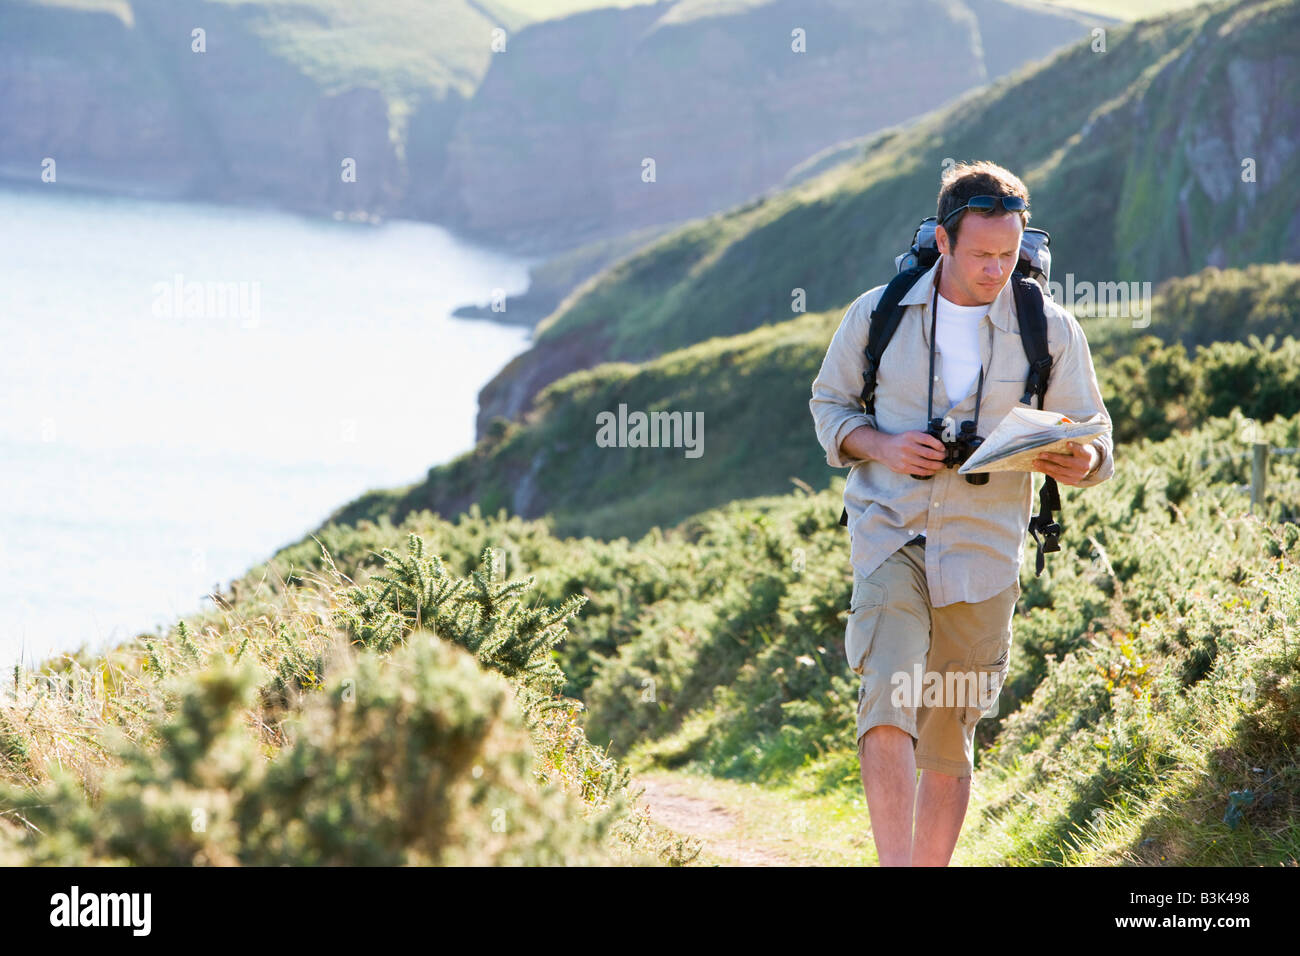 Man walking on cliffside path looking at map Stock Photo